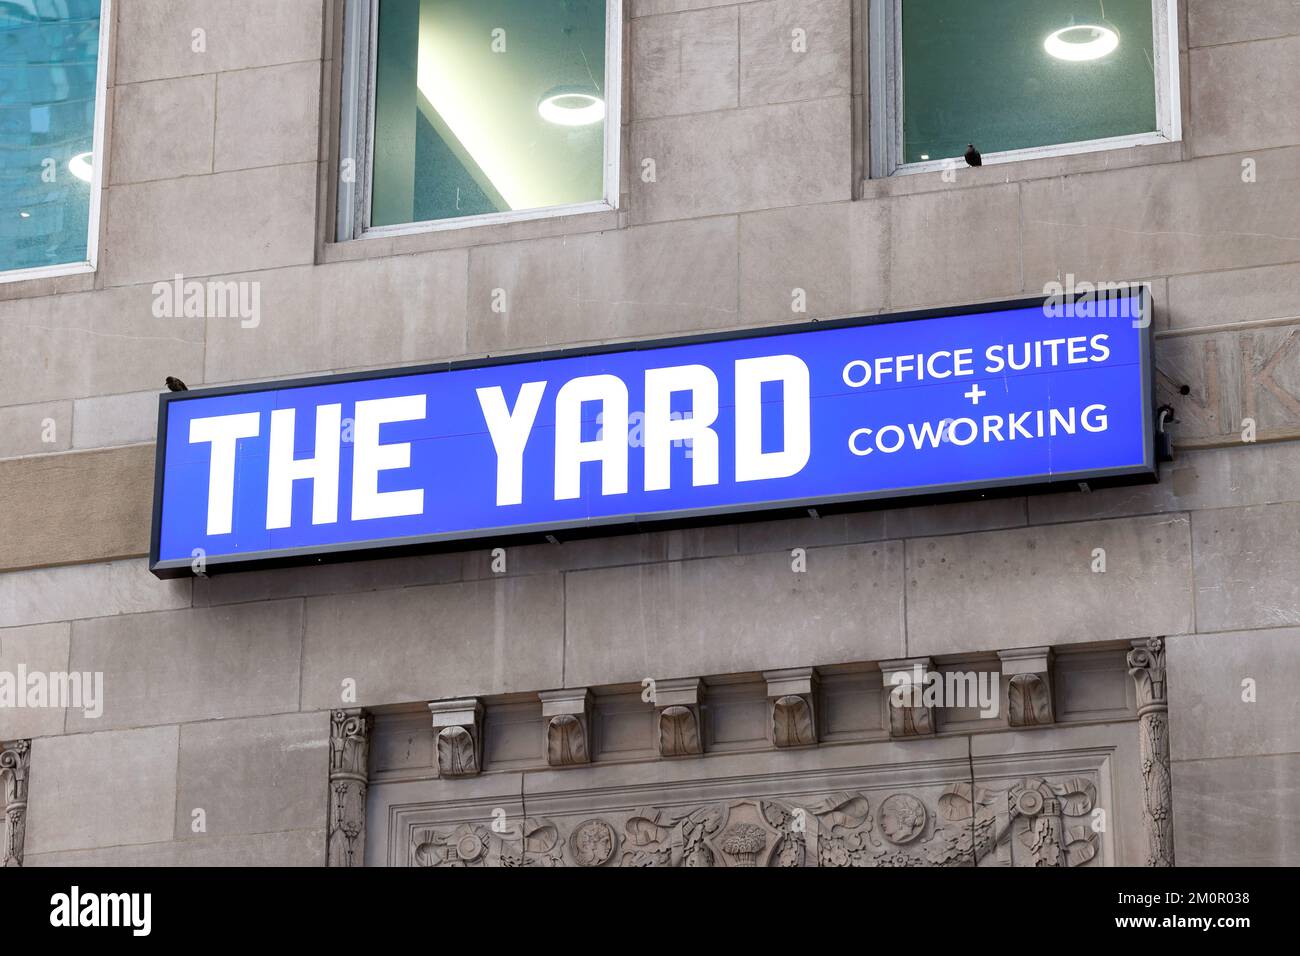 Signage for The Yard coworking space, shared workspace, rental office space at a location in Midtown Manhattan, New York City Stock Photo